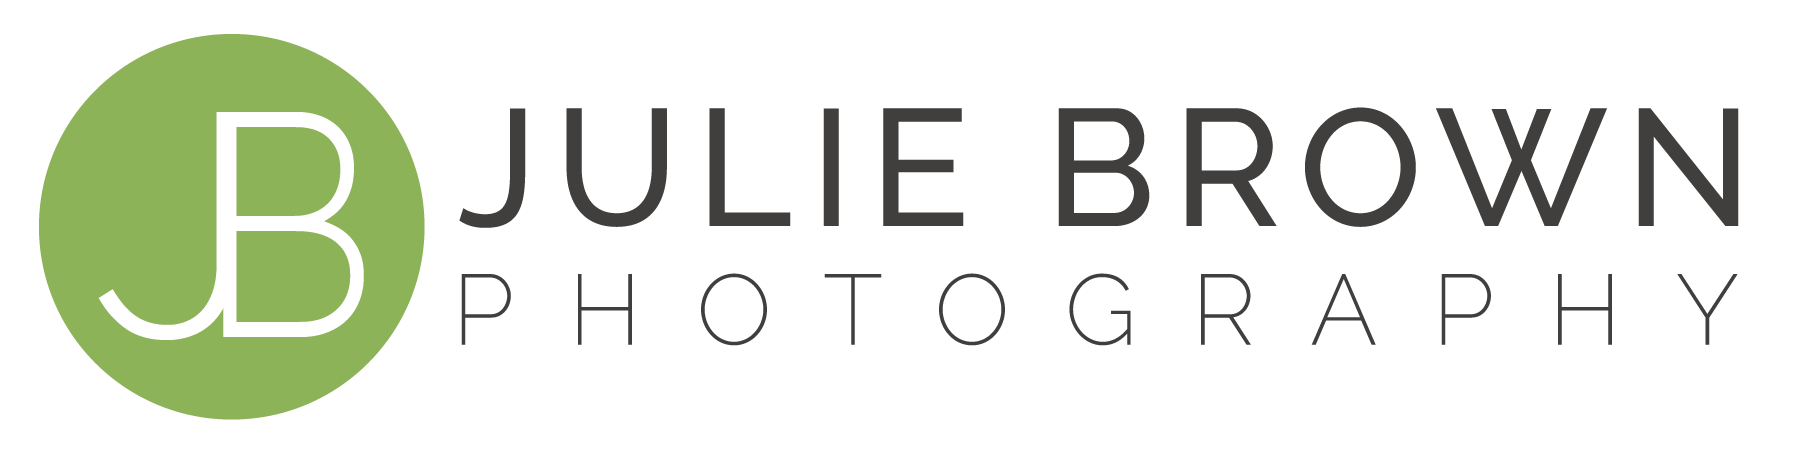 Julie Brown Photography